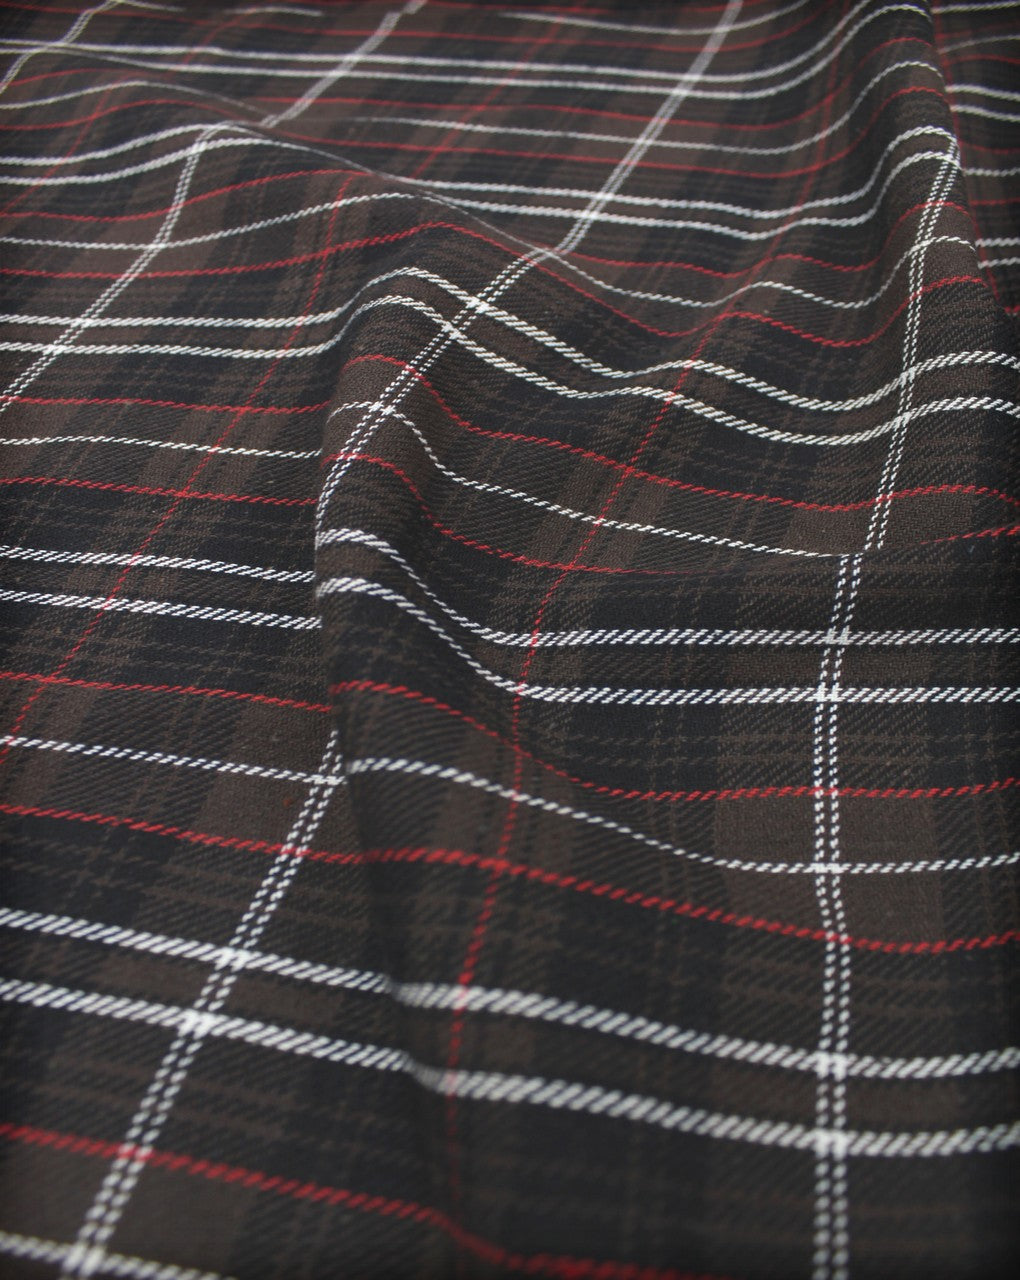 Brown And White Checks Yarn Dyed Cotton Fabric